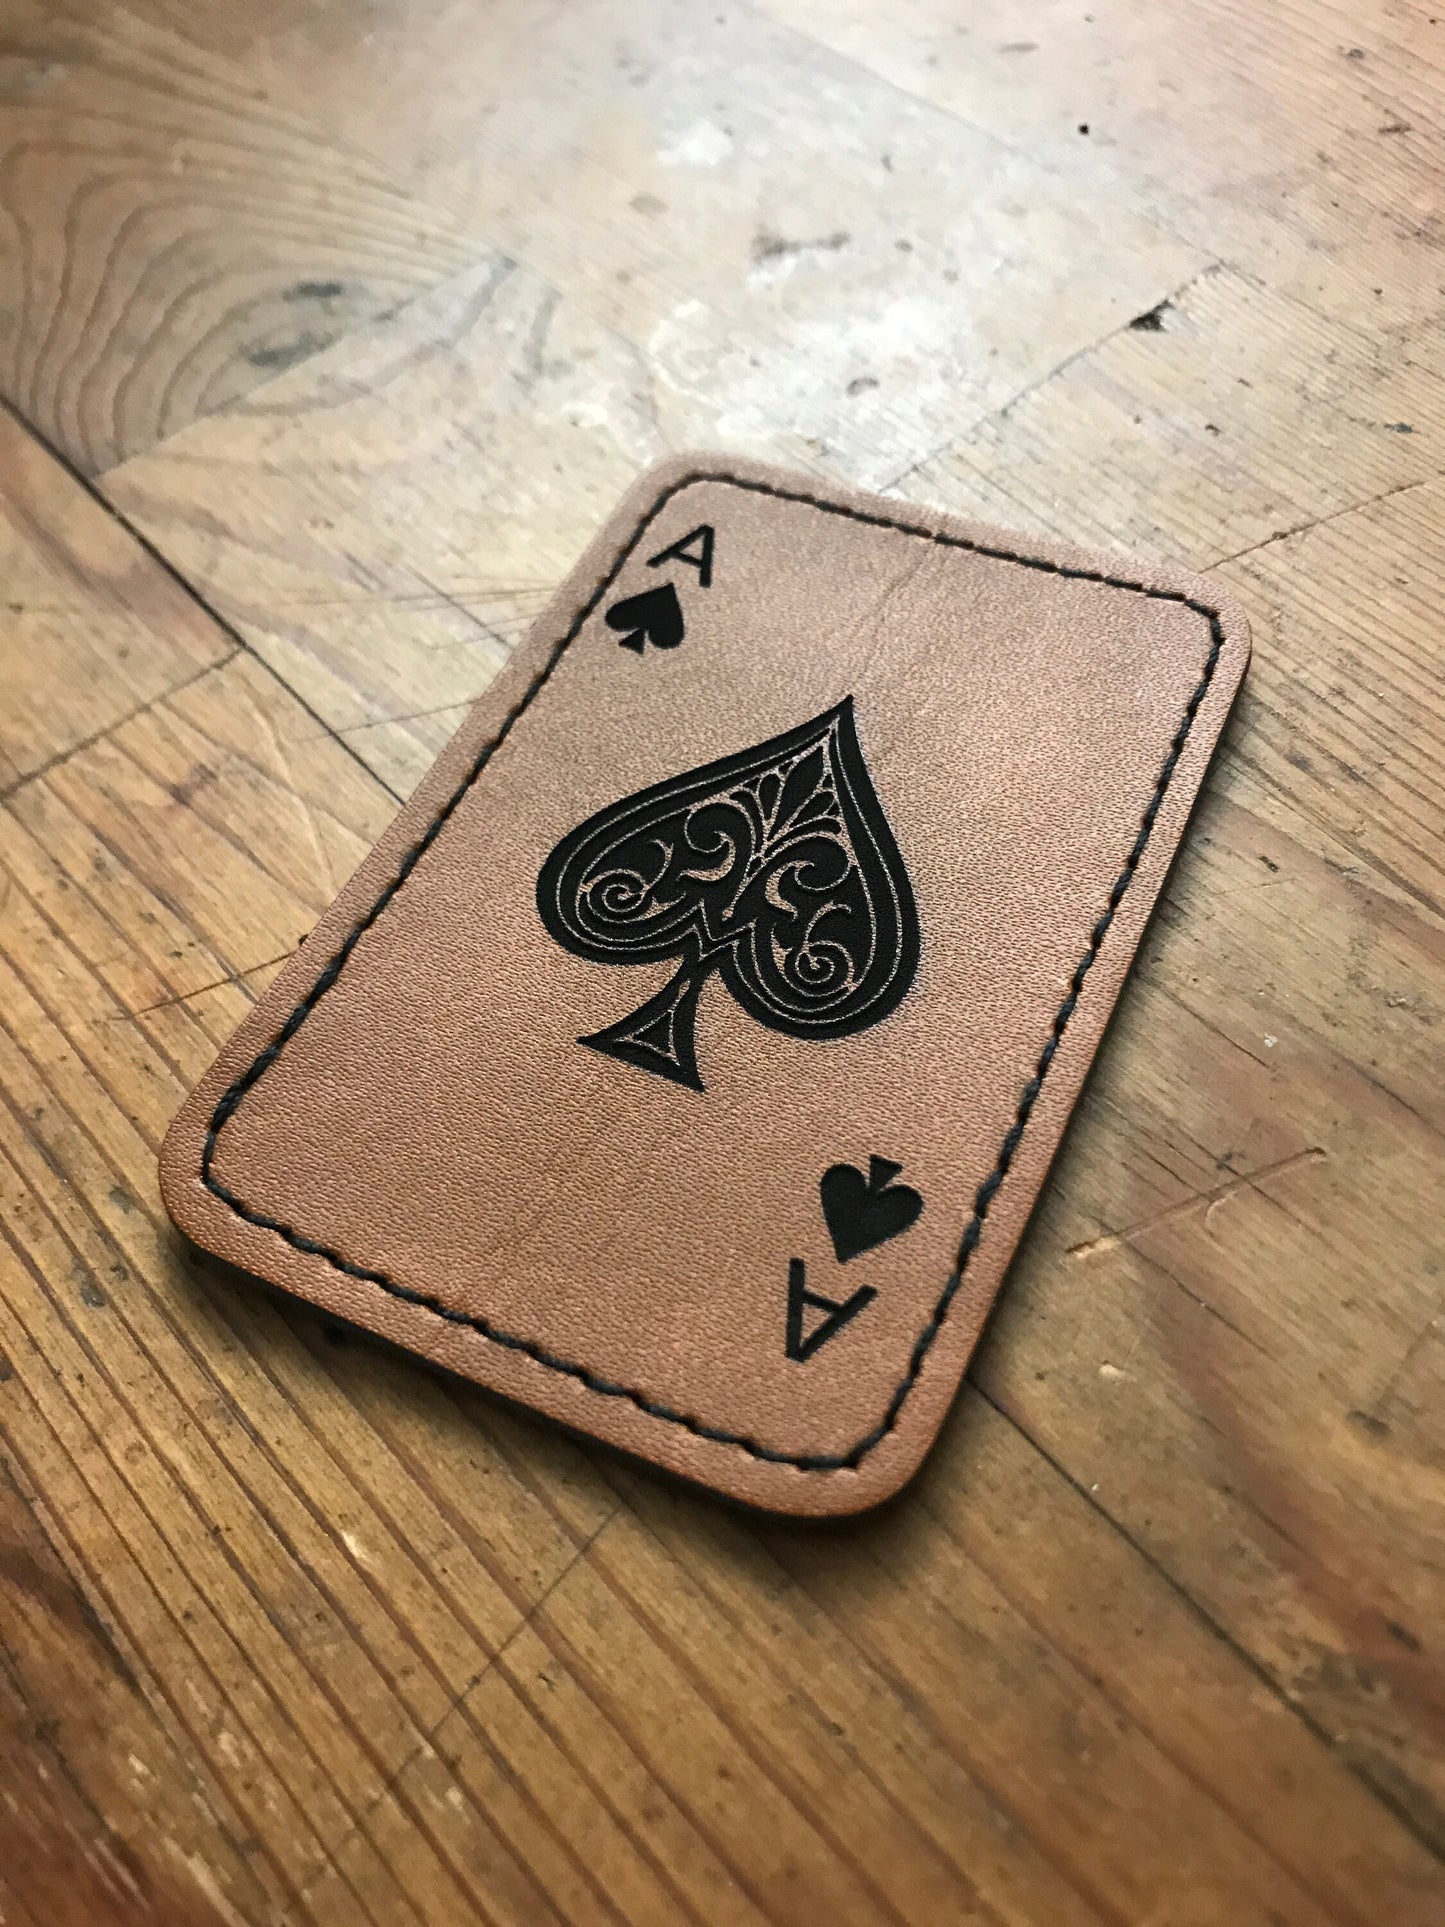 Ace of Spades Leather Engraved Patch, 3x2" Rectangle Aces Brown Burning Engraving, Leatherwork Custom Gaming Gifts